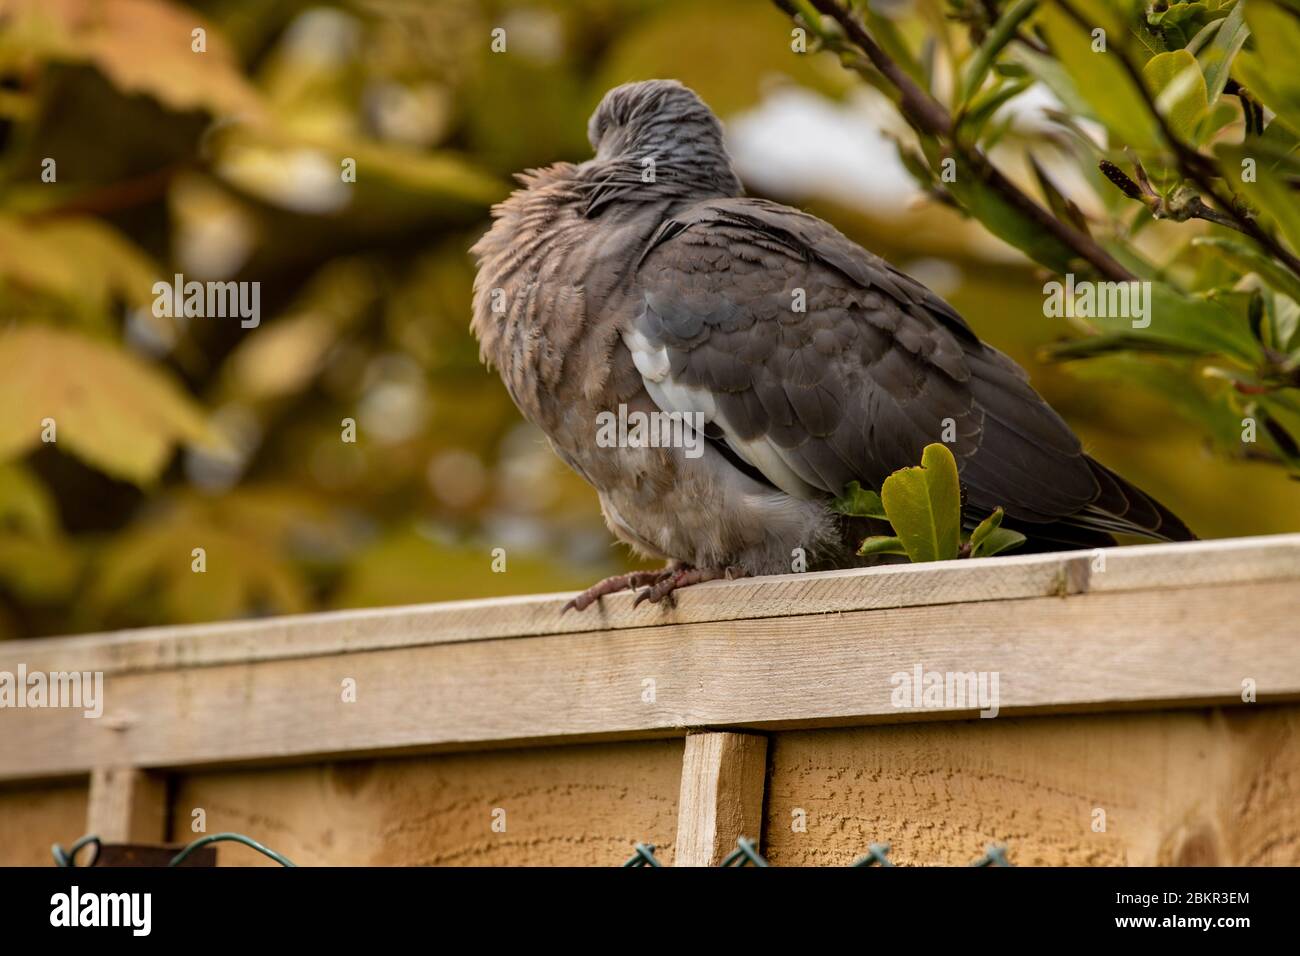 Young fledgling pigeon resting on garden fence in the spring sunshine Stock Photo